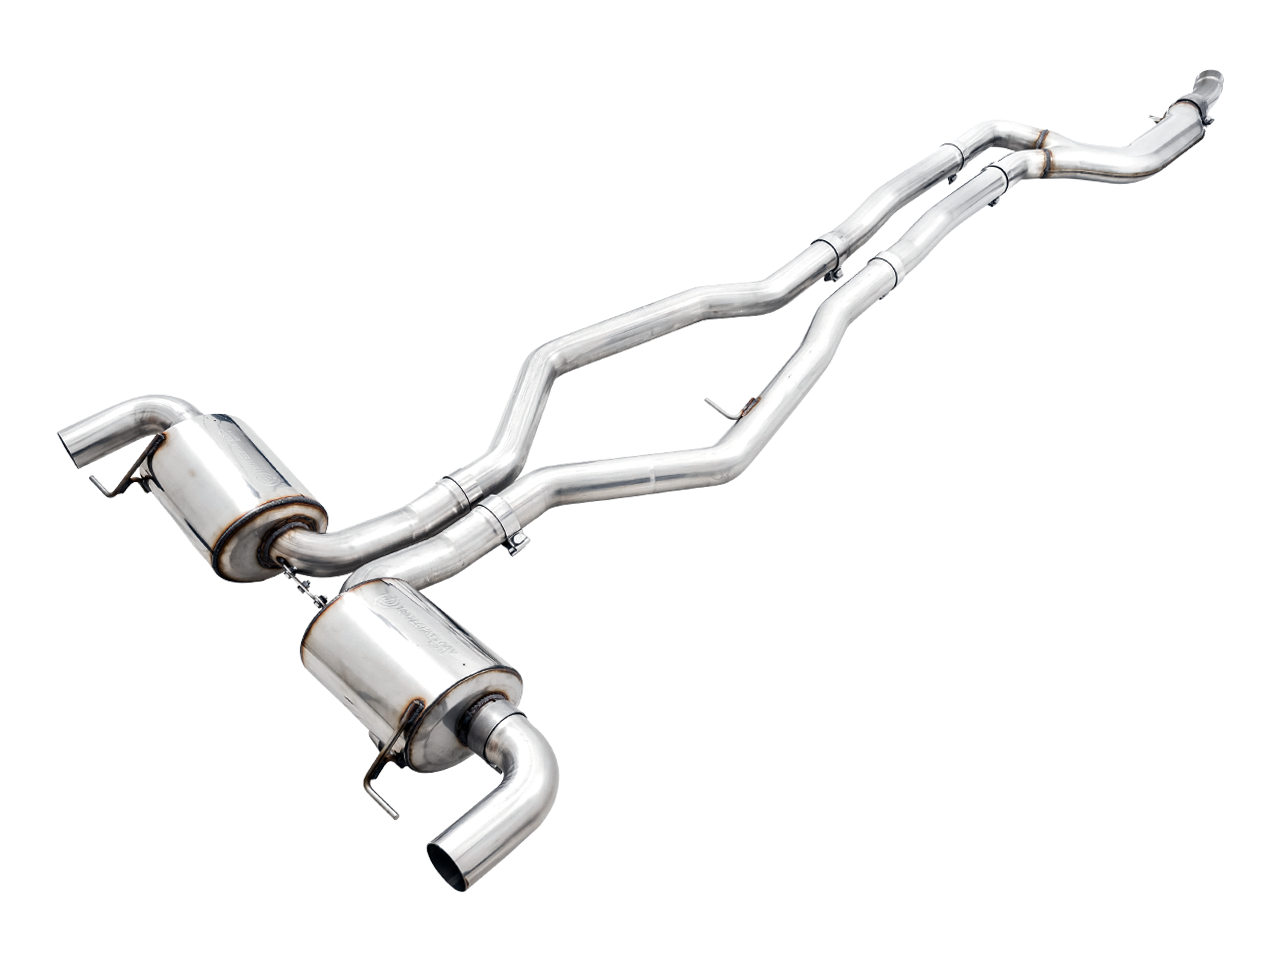 3015-11058  AWE Tuning Exhaust Suite for BMW G20 M340i – UroTuning